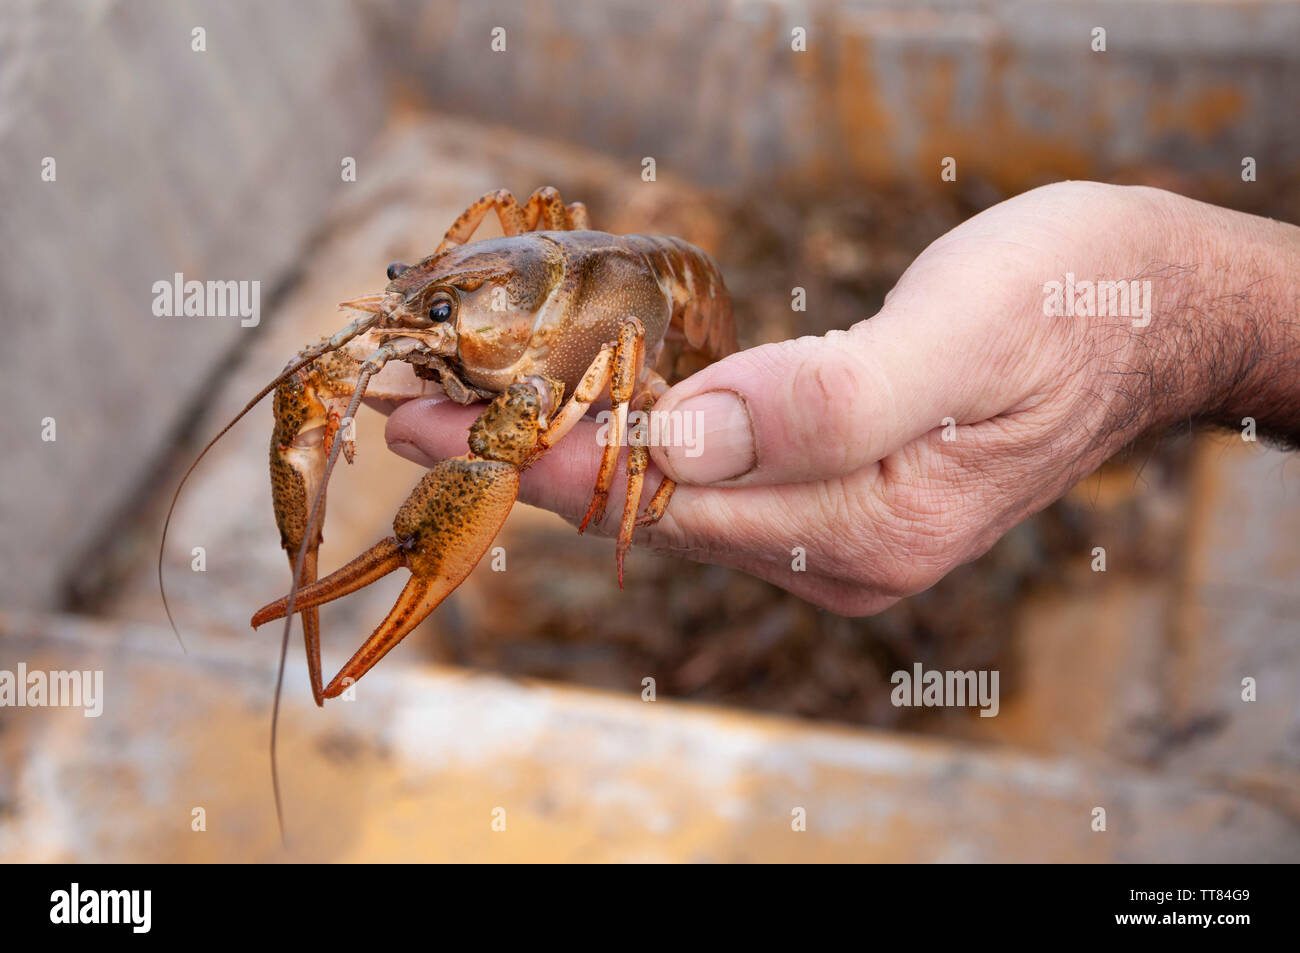 Closeup of male hand holding an alive freshwater crayfish Stock Photo